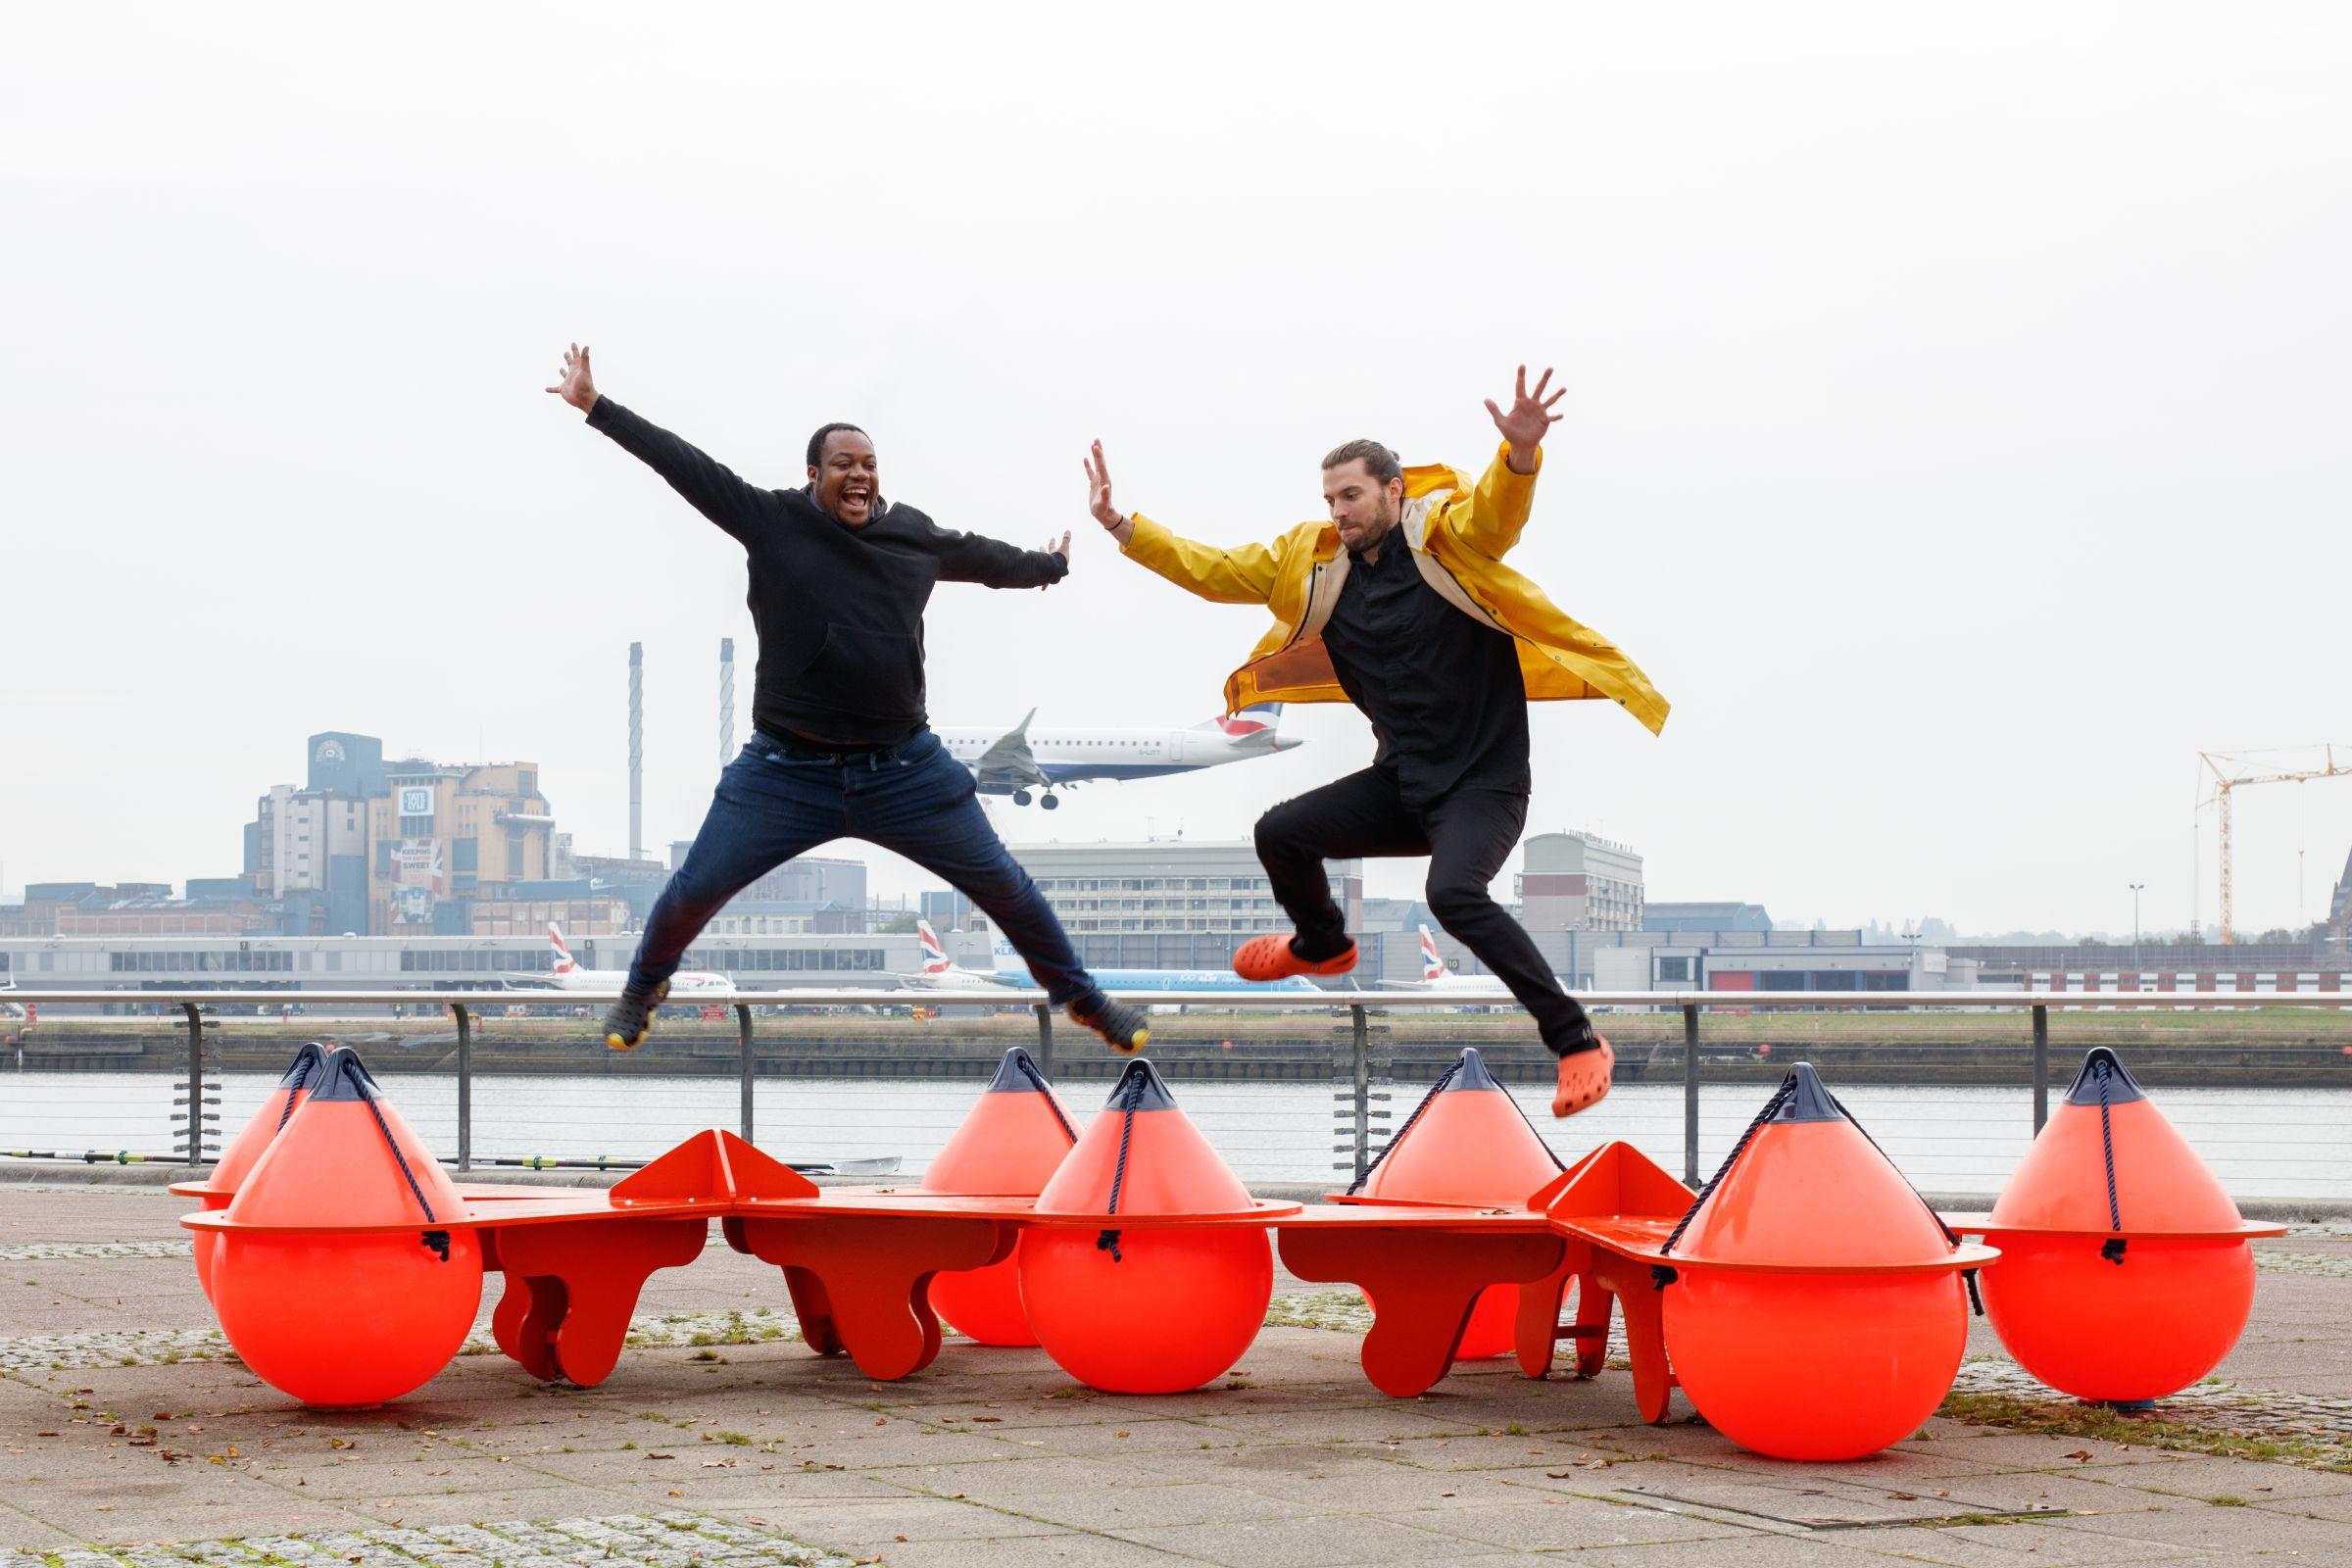 The Buoys are Back in Town bench sculpture by McCloy + Muchemwa